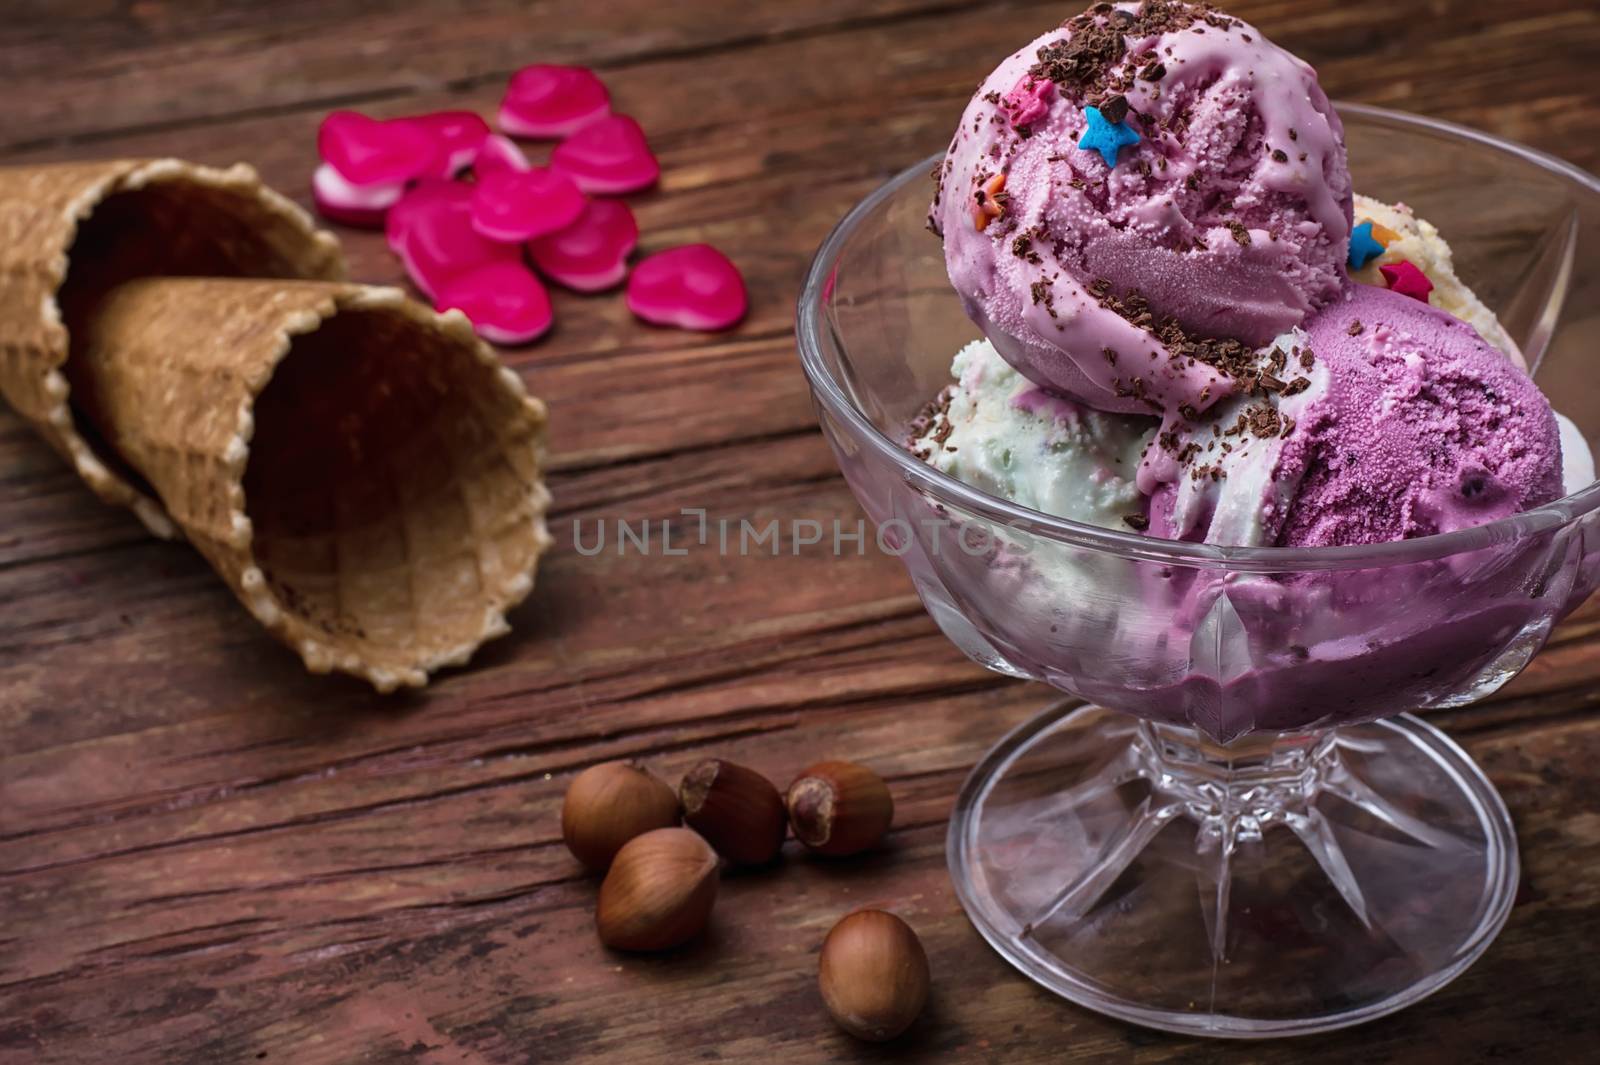 fruit ice cream in  bowl.The image is tinted in vintage style.Shallow DOF